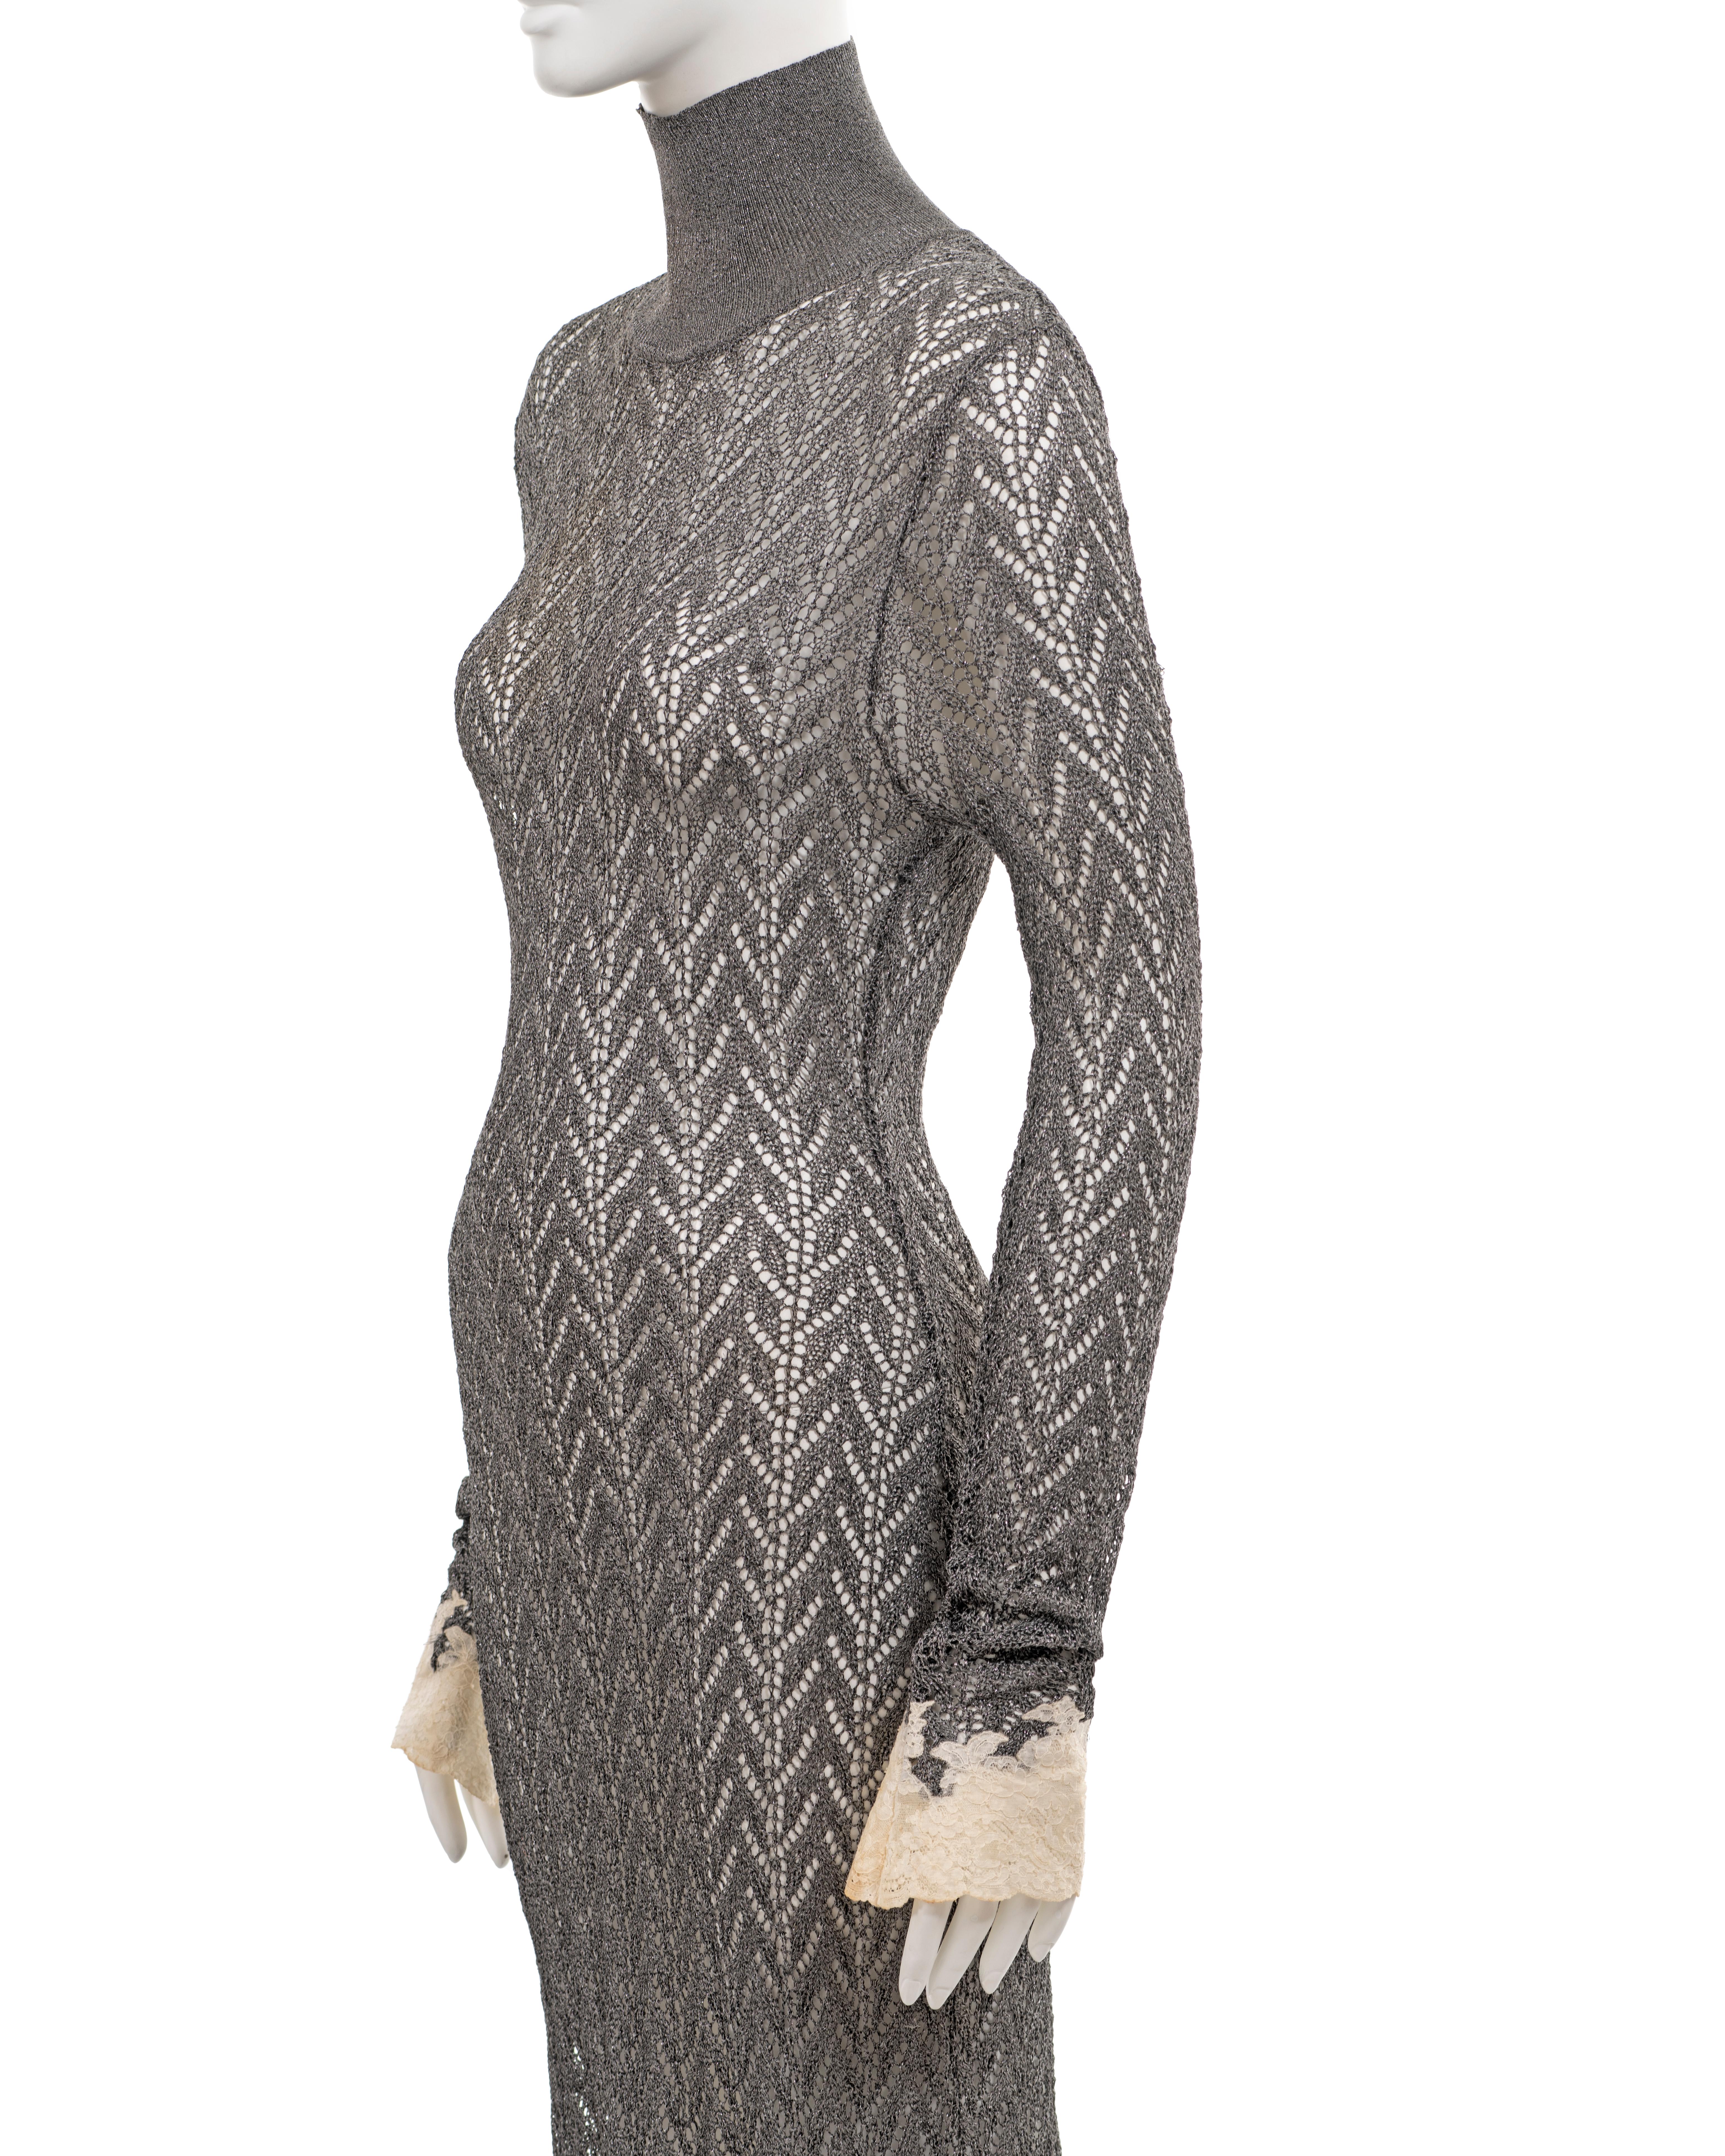 Christian Dior by John Galliano silver open-knit dress with lace trim, fw 1998 For Sale 2